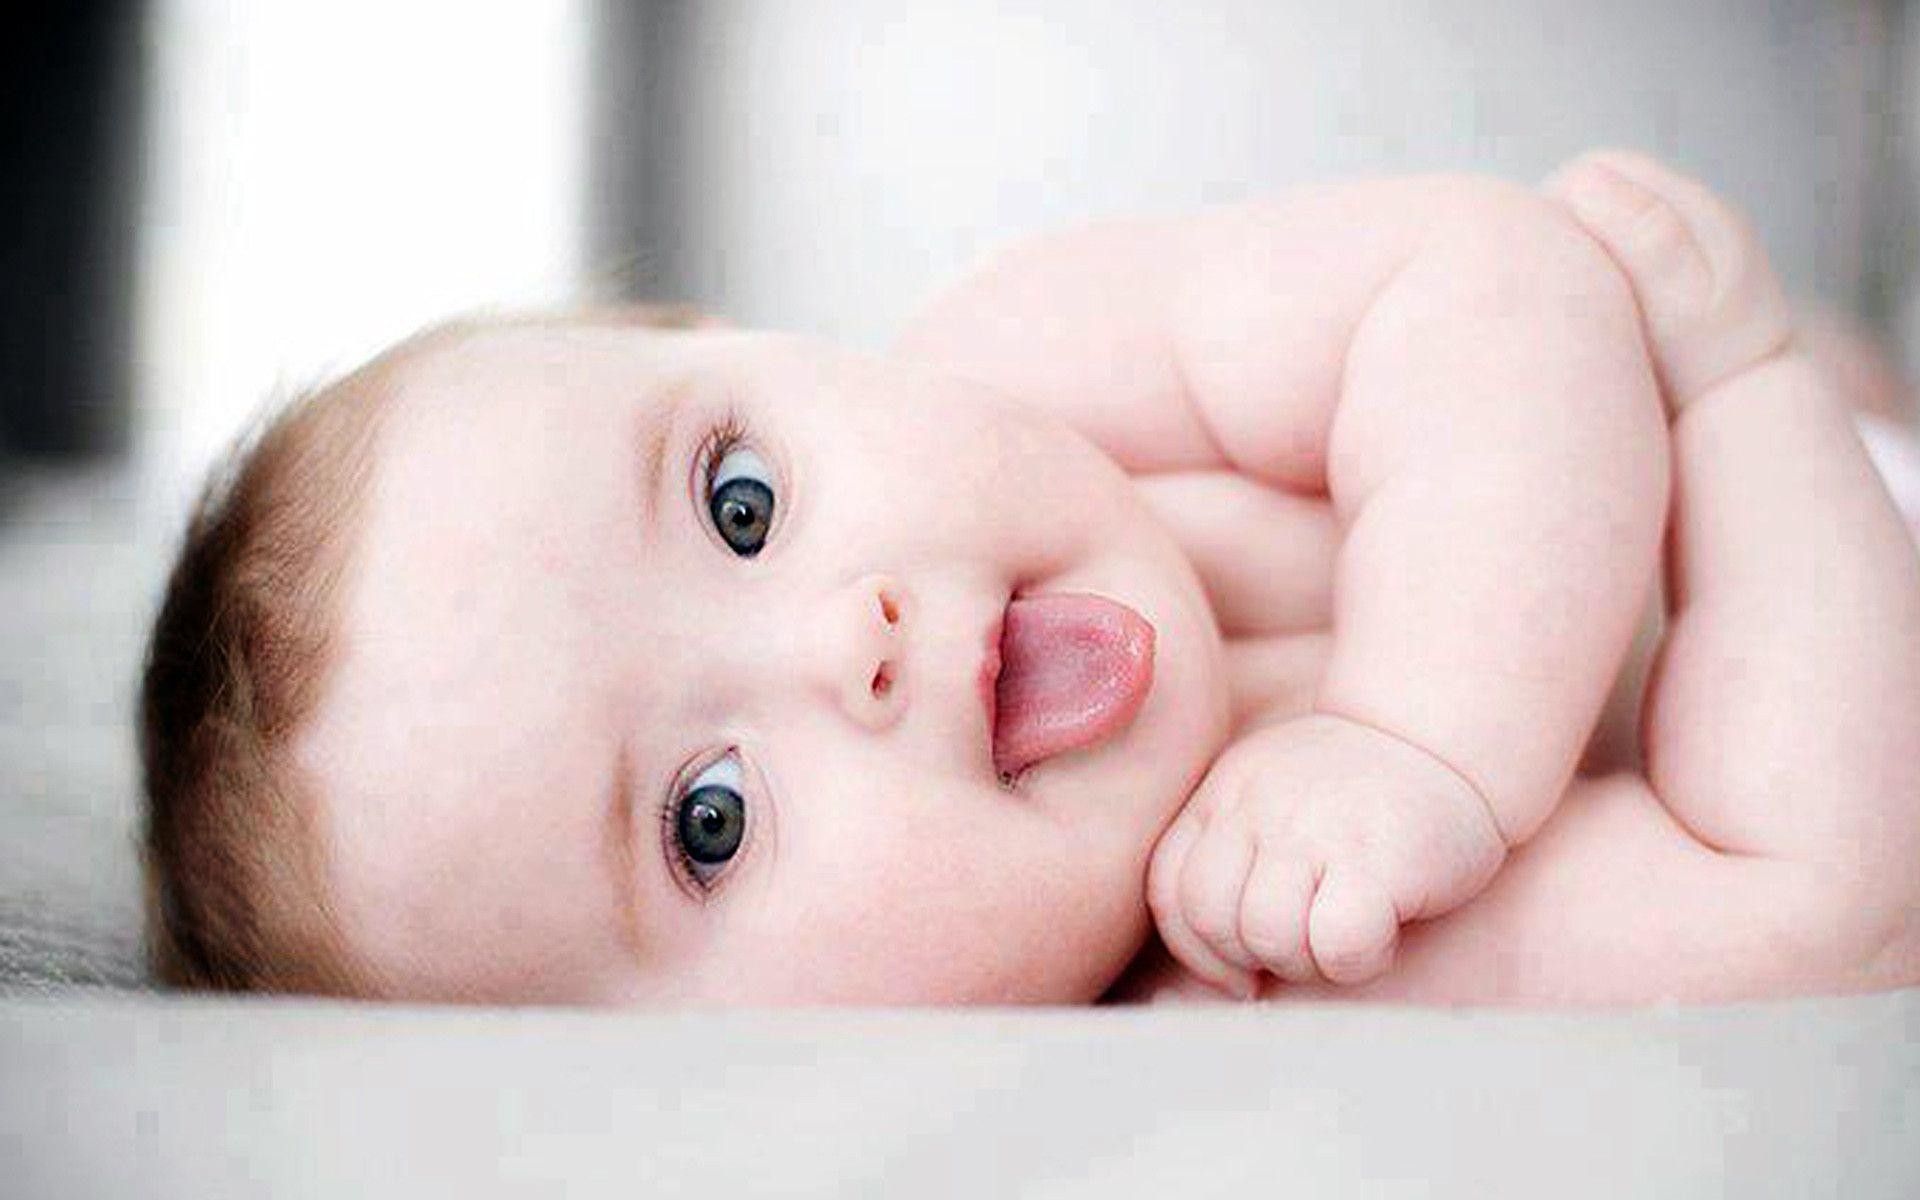 Very Cute Baby Images || Very Cute Baby Images HD || Cute Baby Images || Baby  Images - Mixing Images